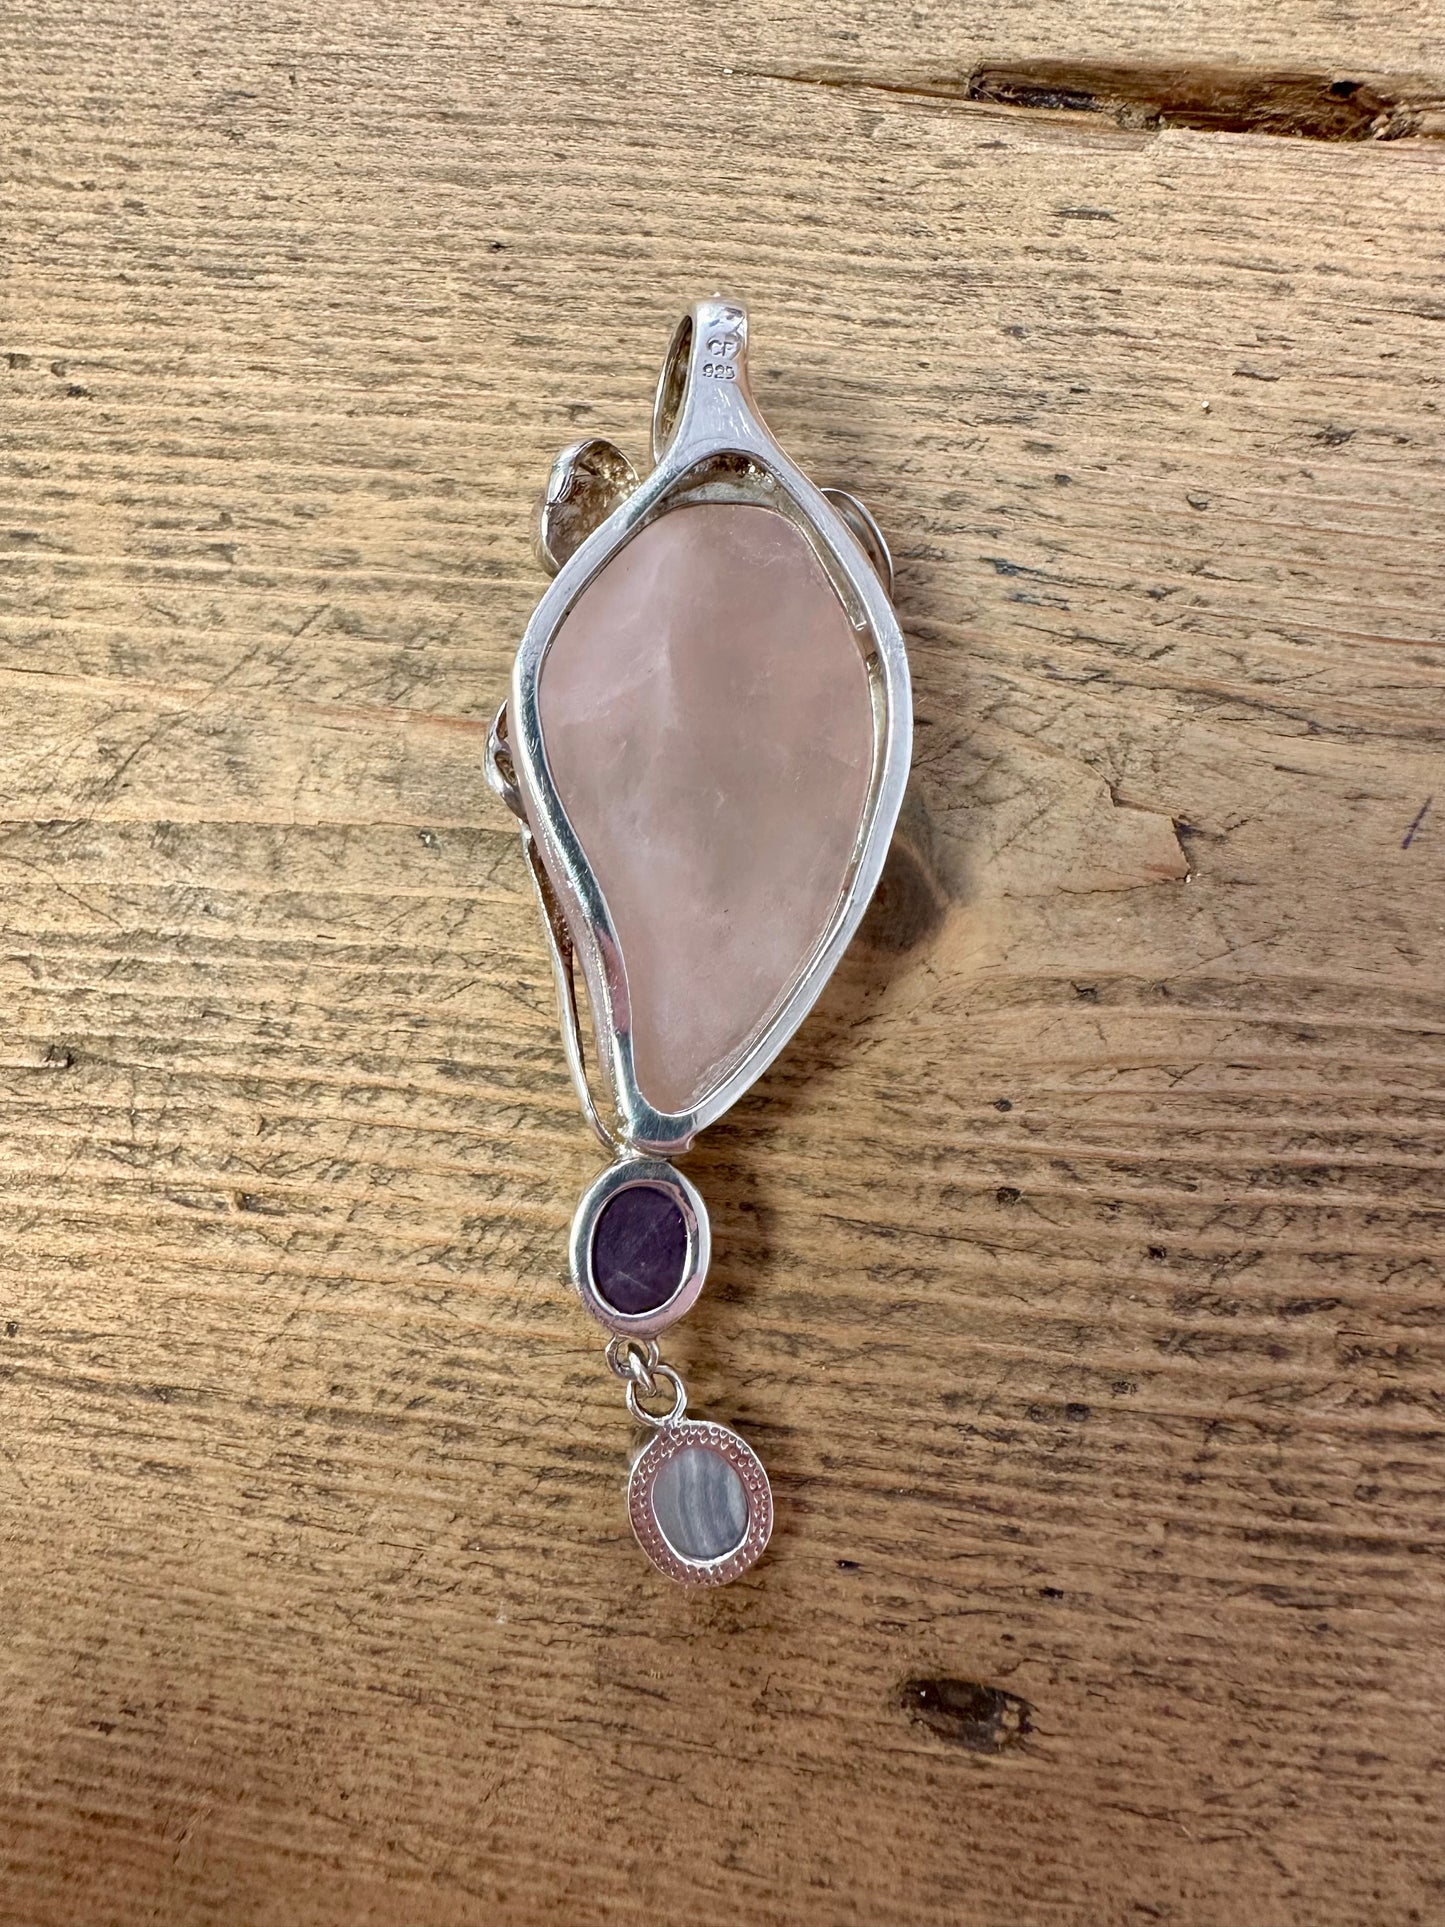 Abstract Rose Quarts Amethyst and Agate 925 Silver Pendant